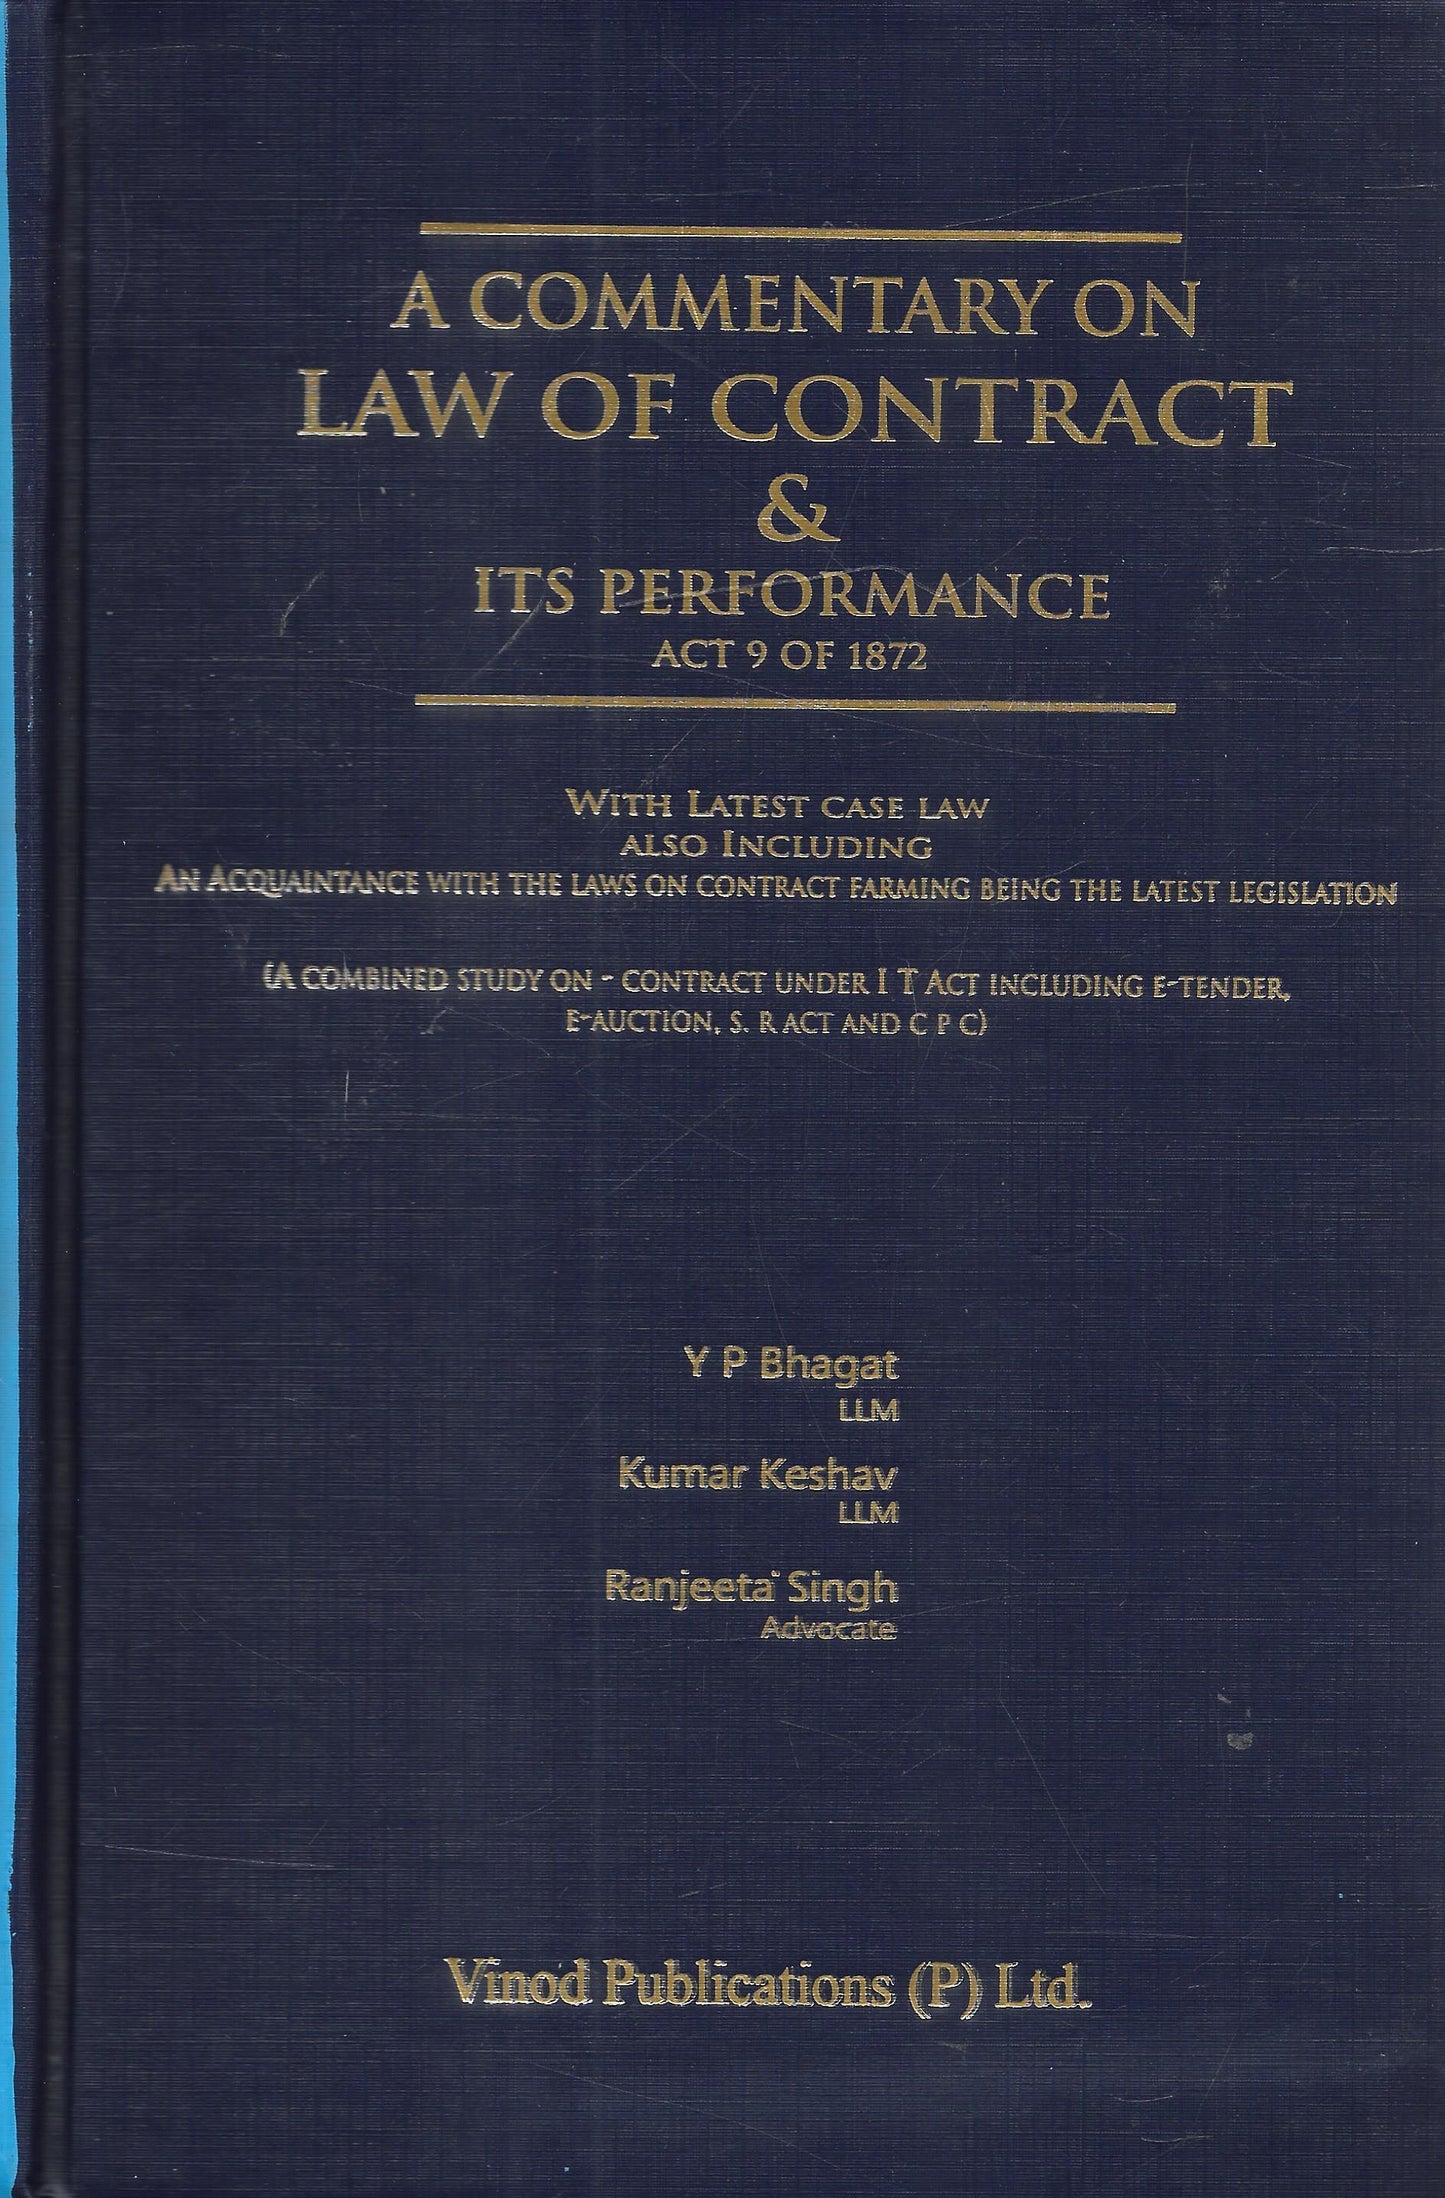 A Commentary on Law of Contract & its Performance